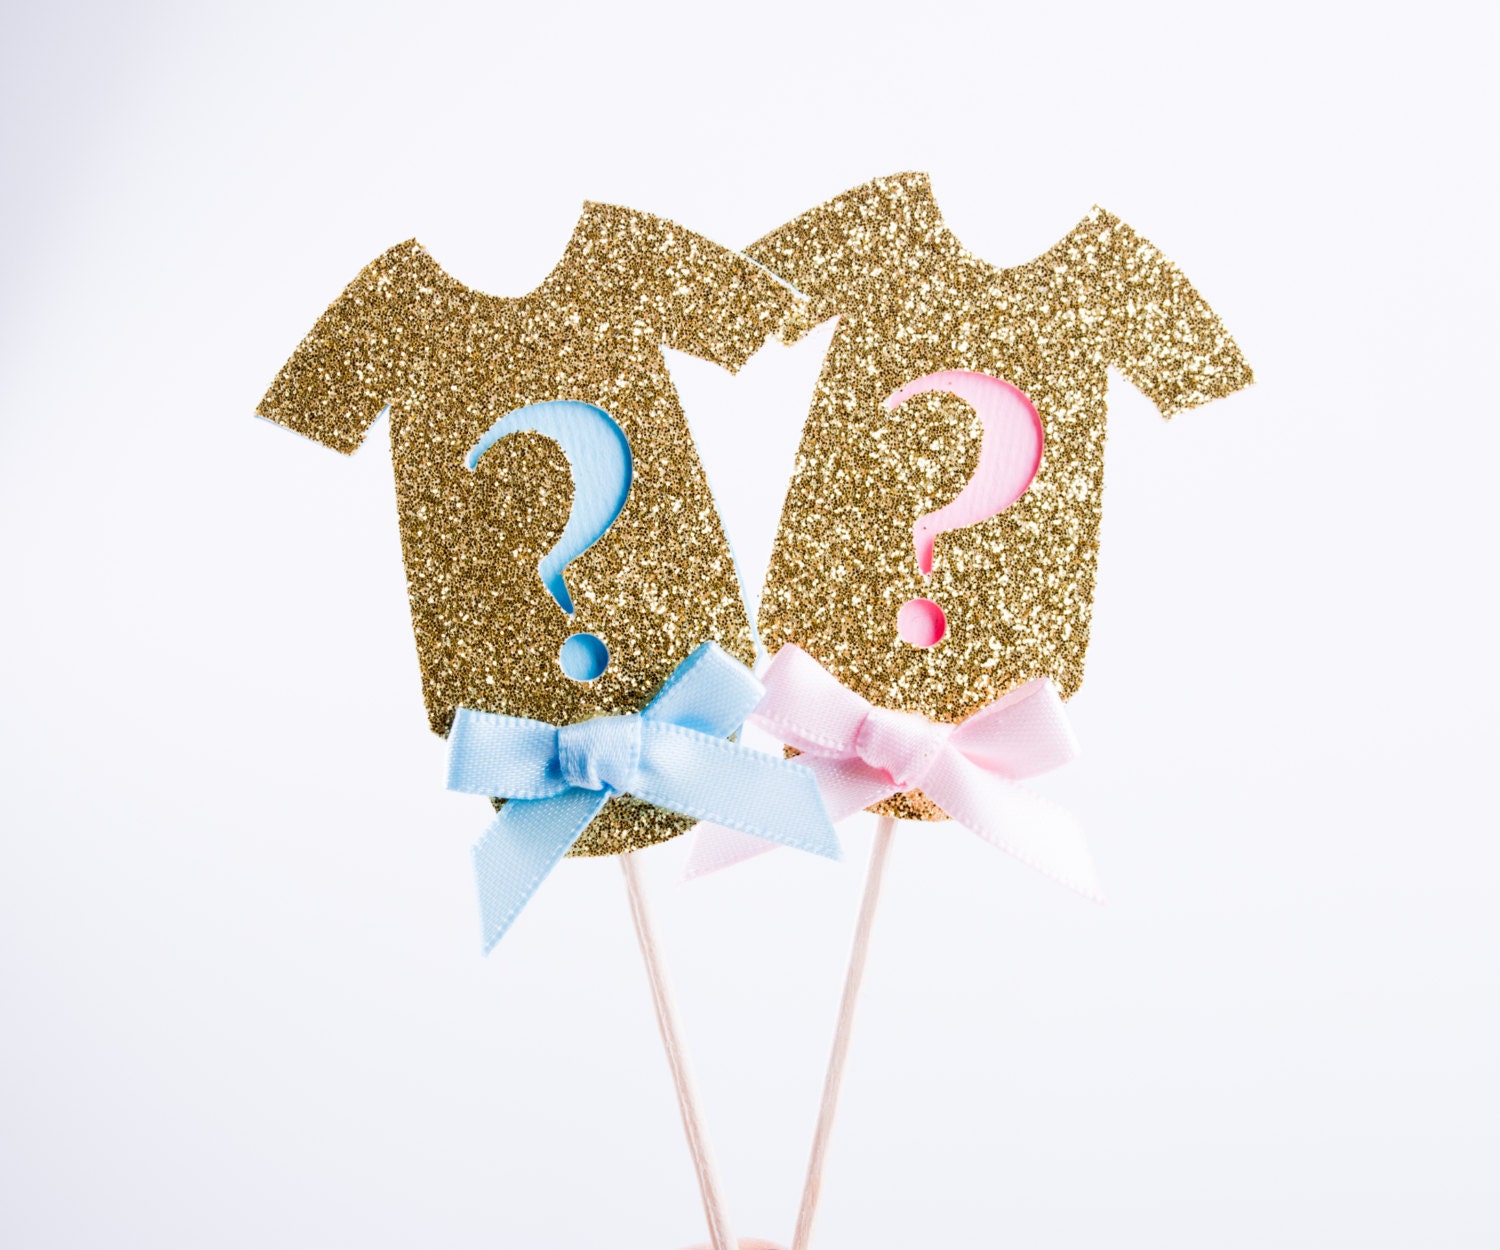 Happy Sweet 16 Cake Topper - Gold & Silver Toppers - XOXOKristen